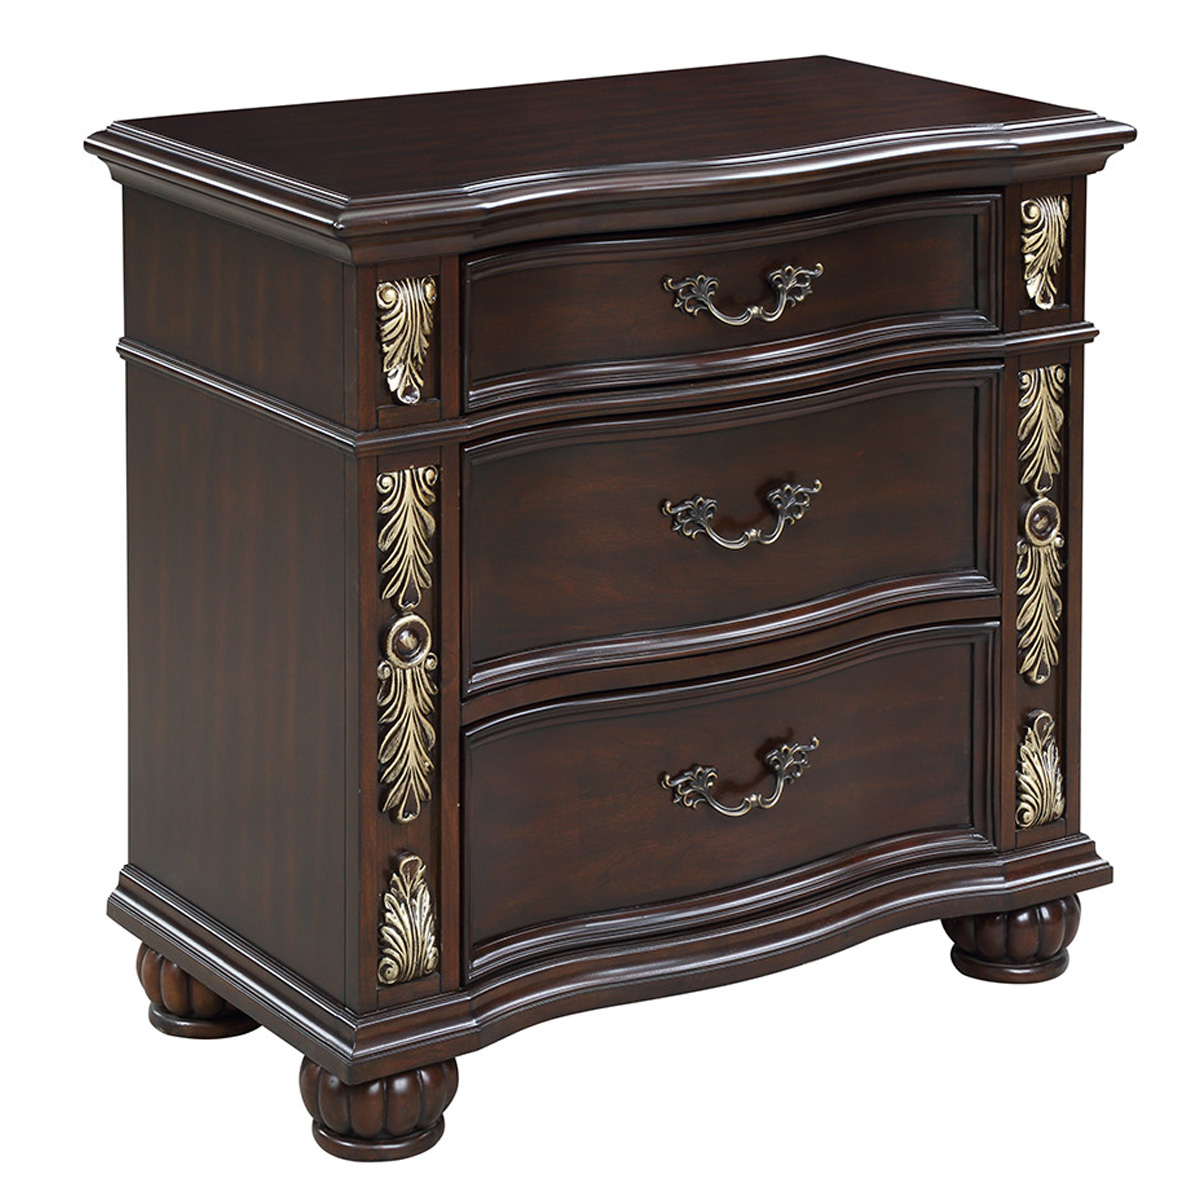 3 Drawer Nightstand With Bun Feet And Scrollwork Accents, Brown And Gold- Saltoro Sherpi